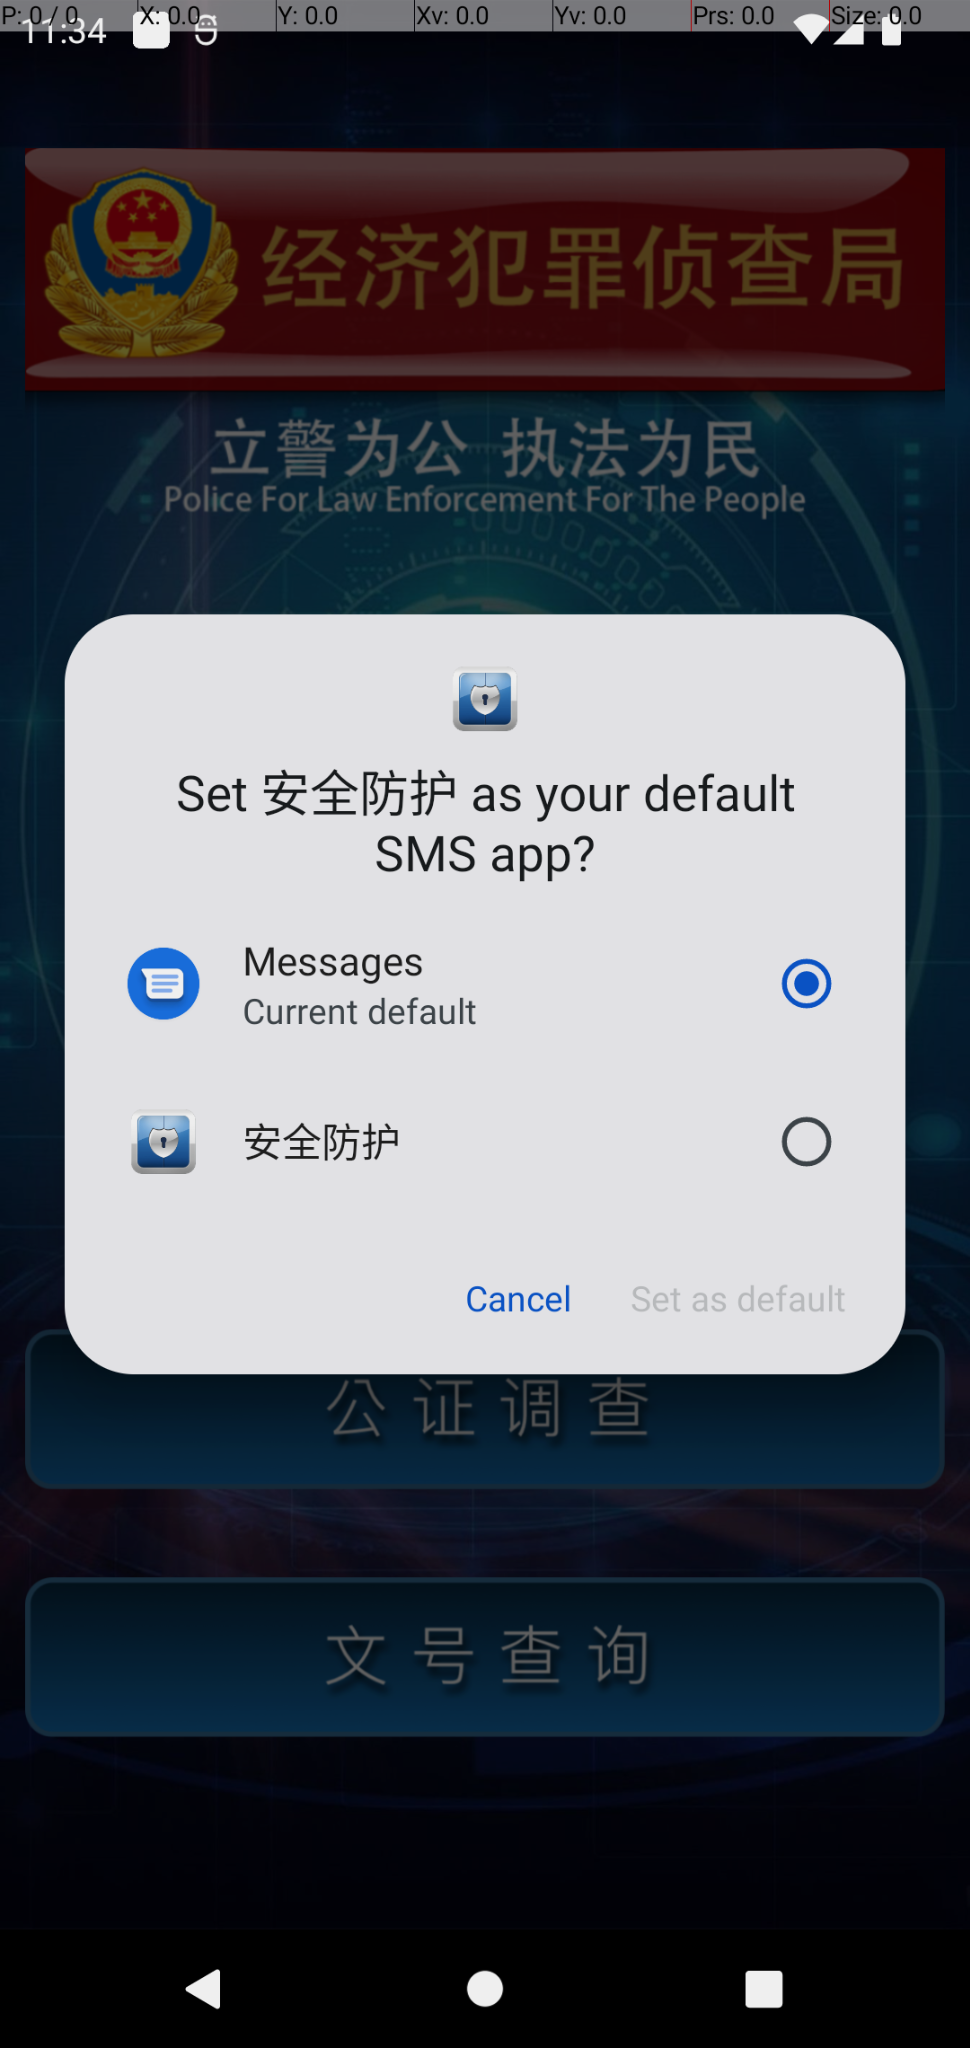 Image 2 is an Android mobile phone screenshot. A popup notification in both English and Chinese characters asks the user to set a malicious application as the default SMS app. 